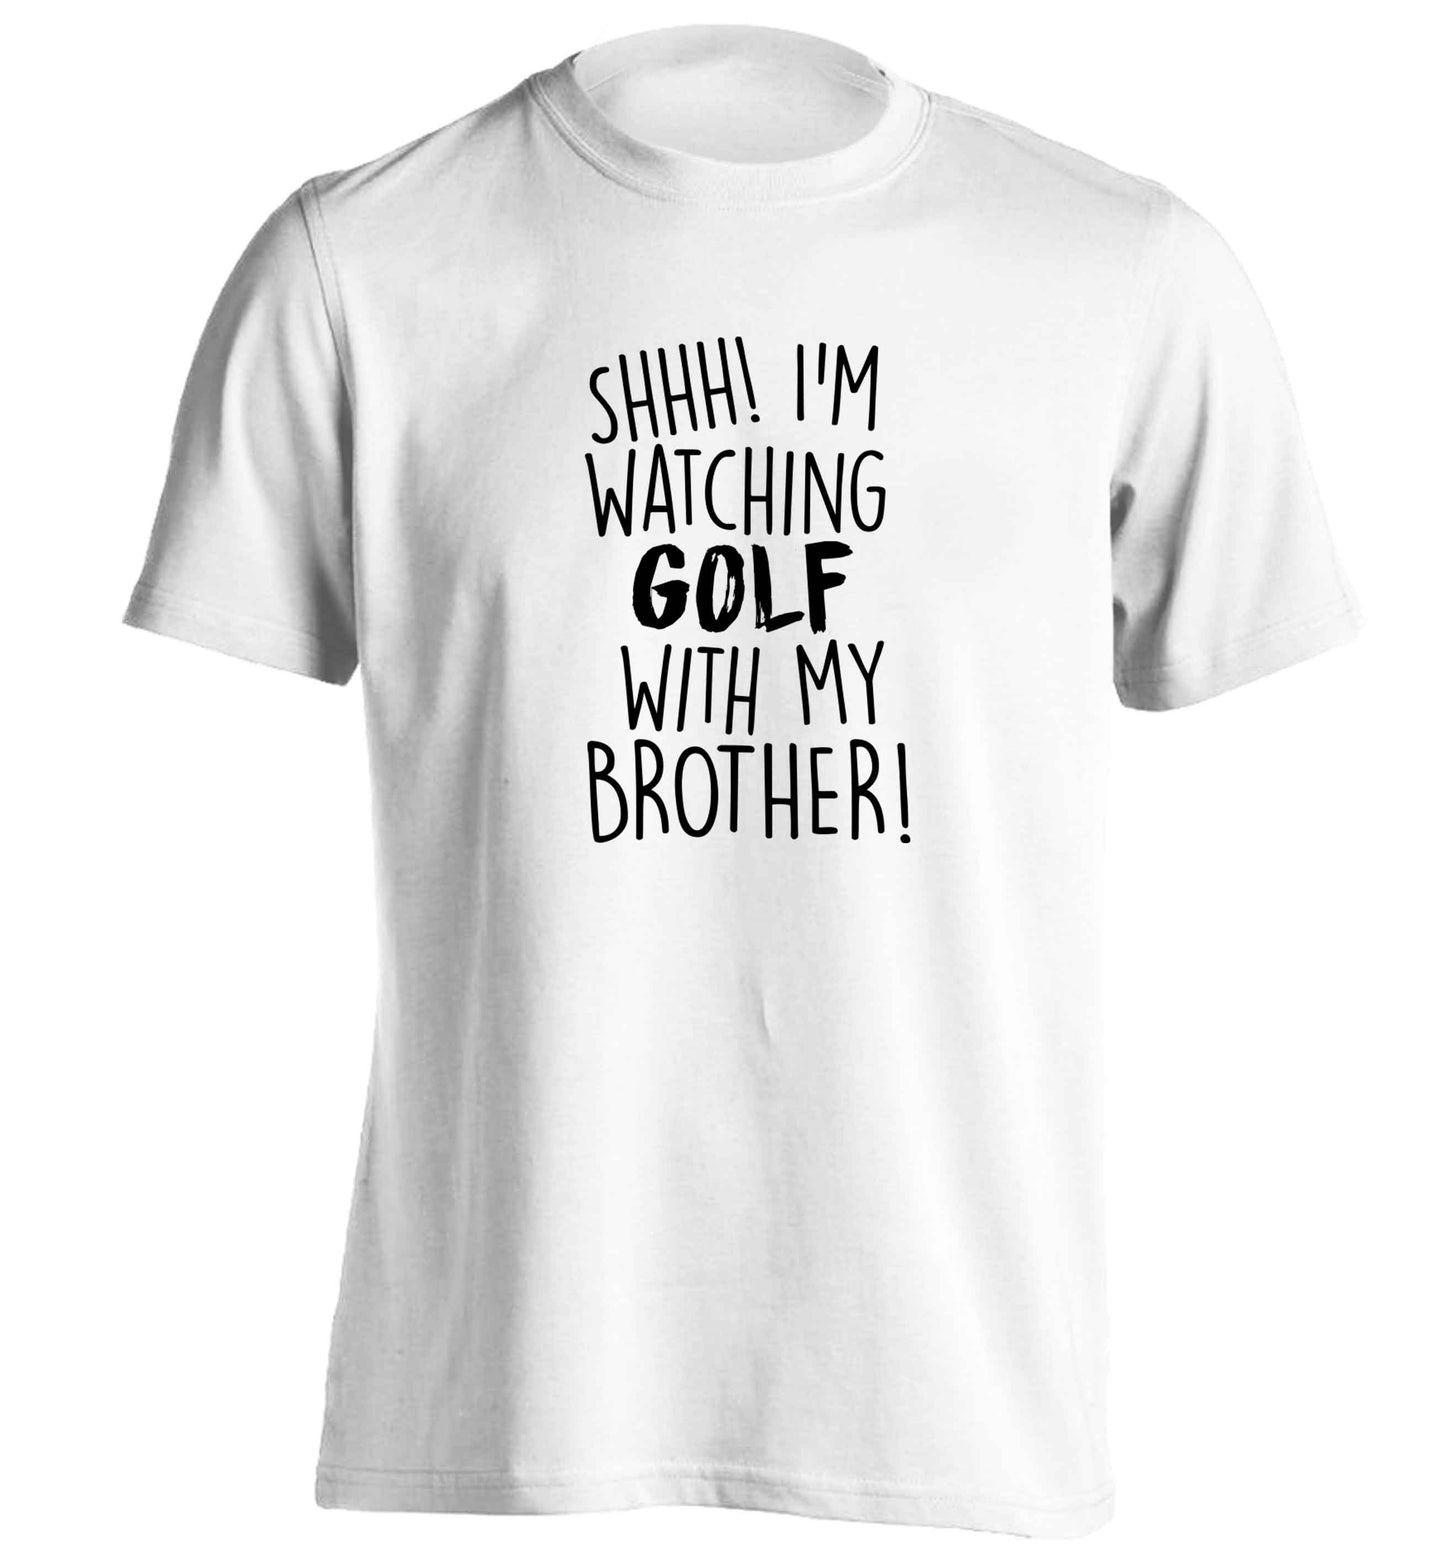 Shh I'm watching golf with my brother adults unisex white Tshirt 2XL